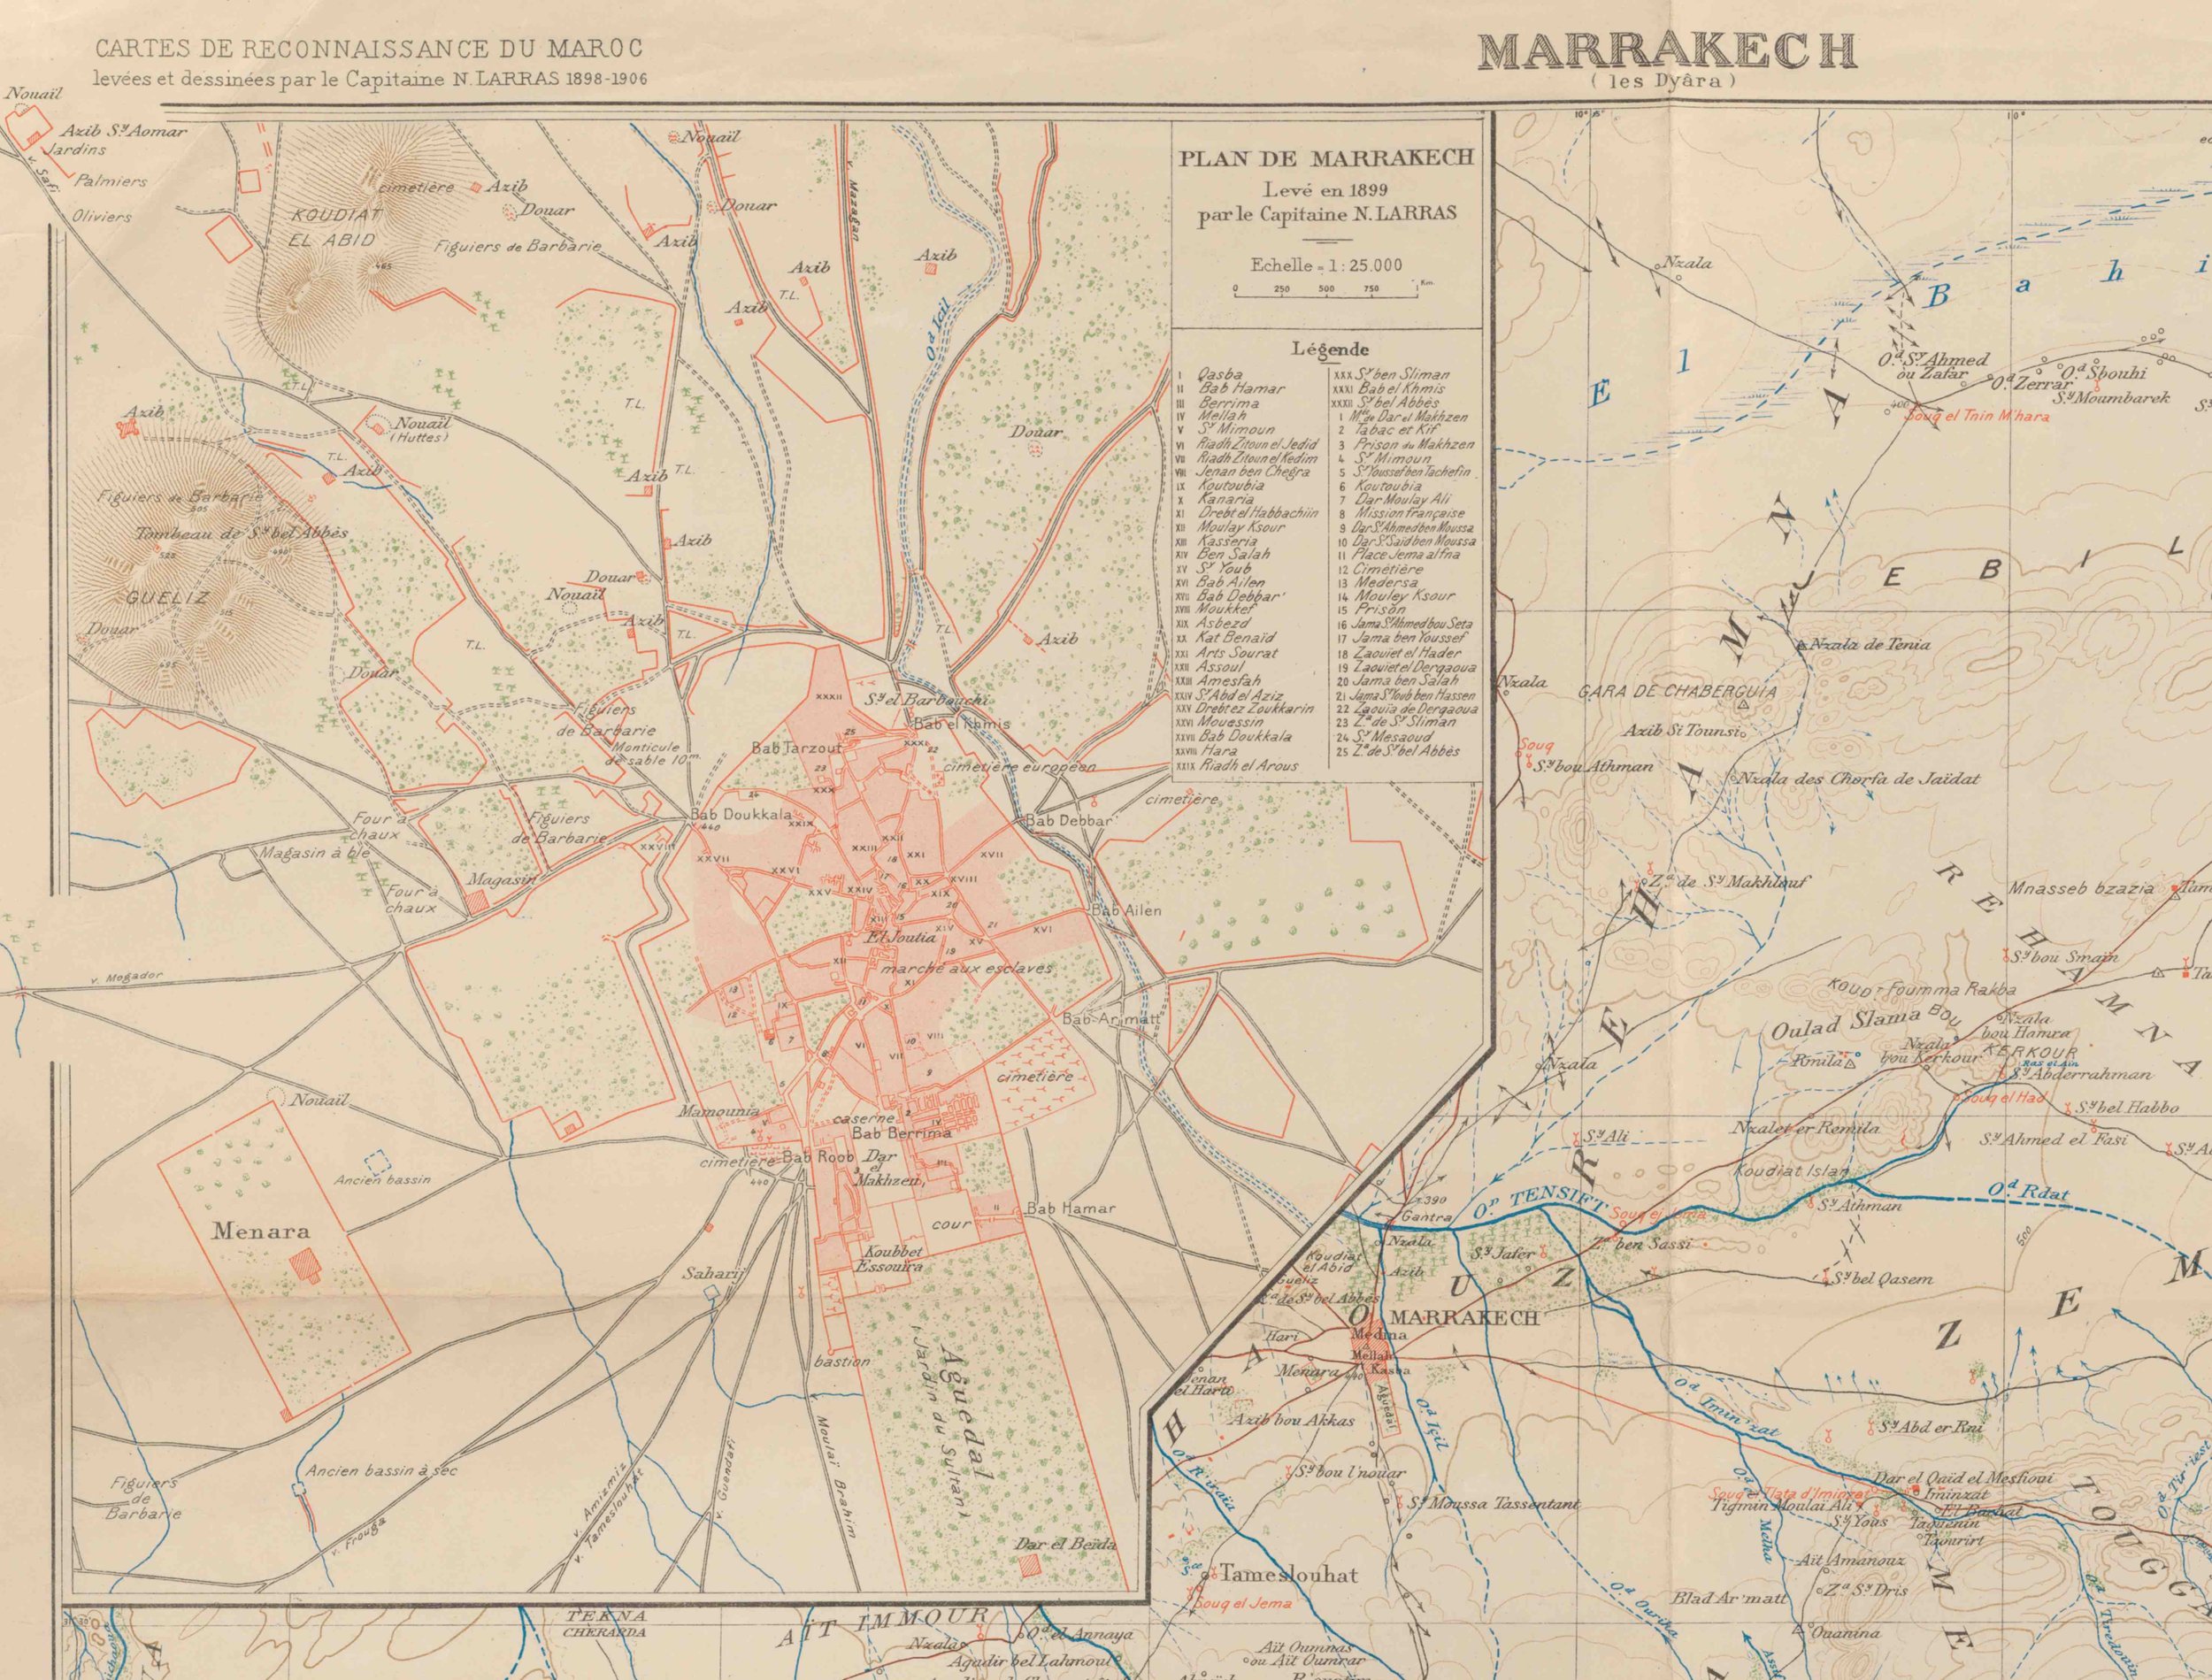 Map of Marrakech surveyed in 1899 by Captain N. Larras